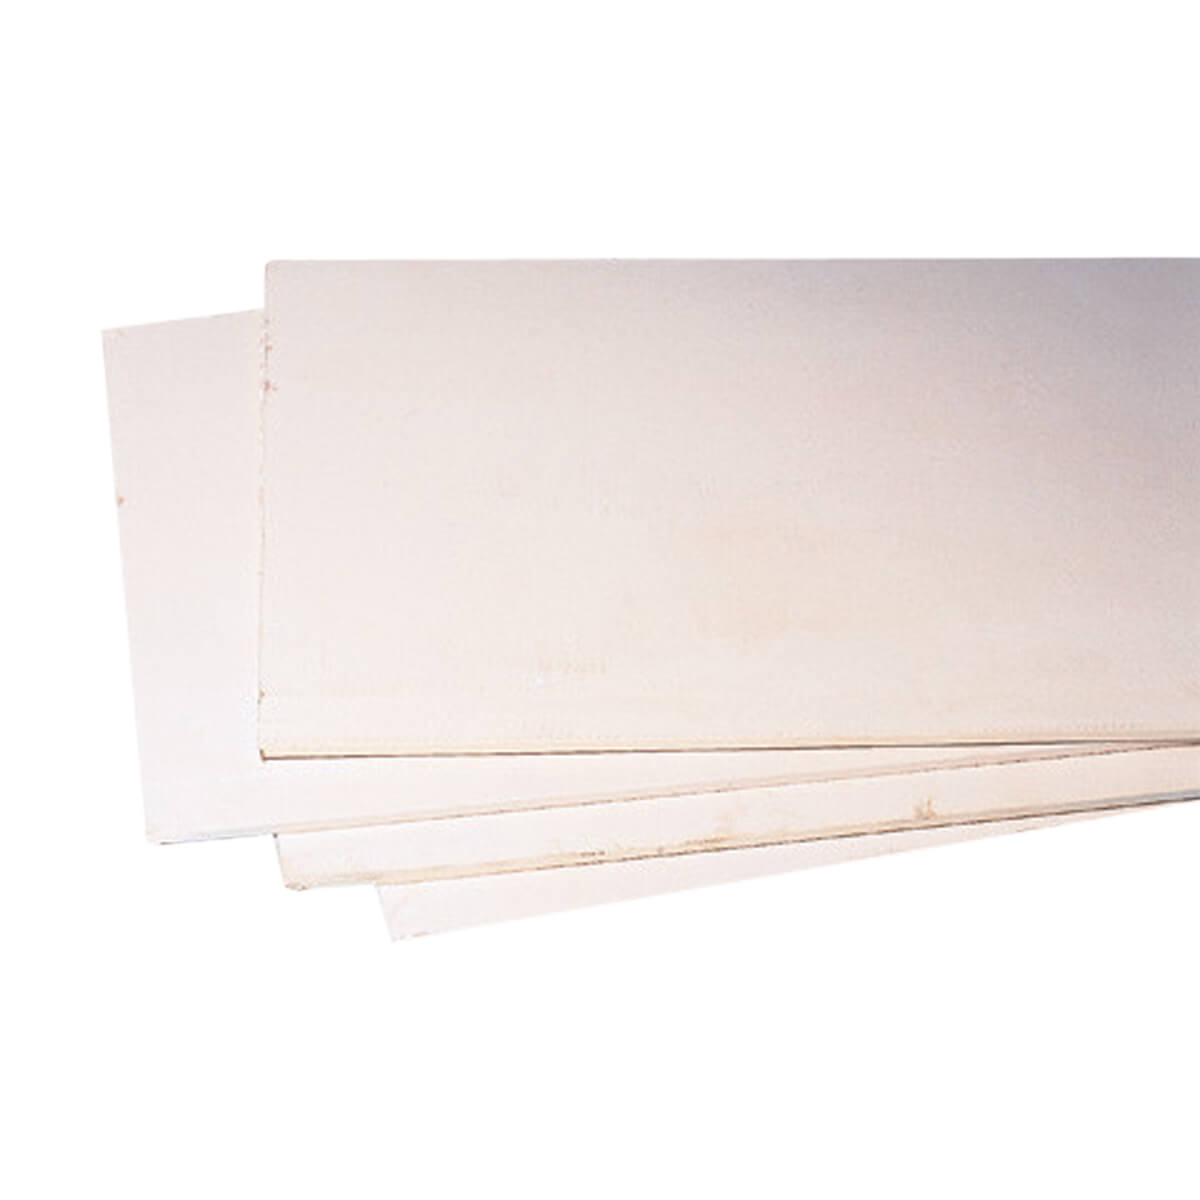 Standard Drywall - 4-ft x 12-ft 1/2-in sheet